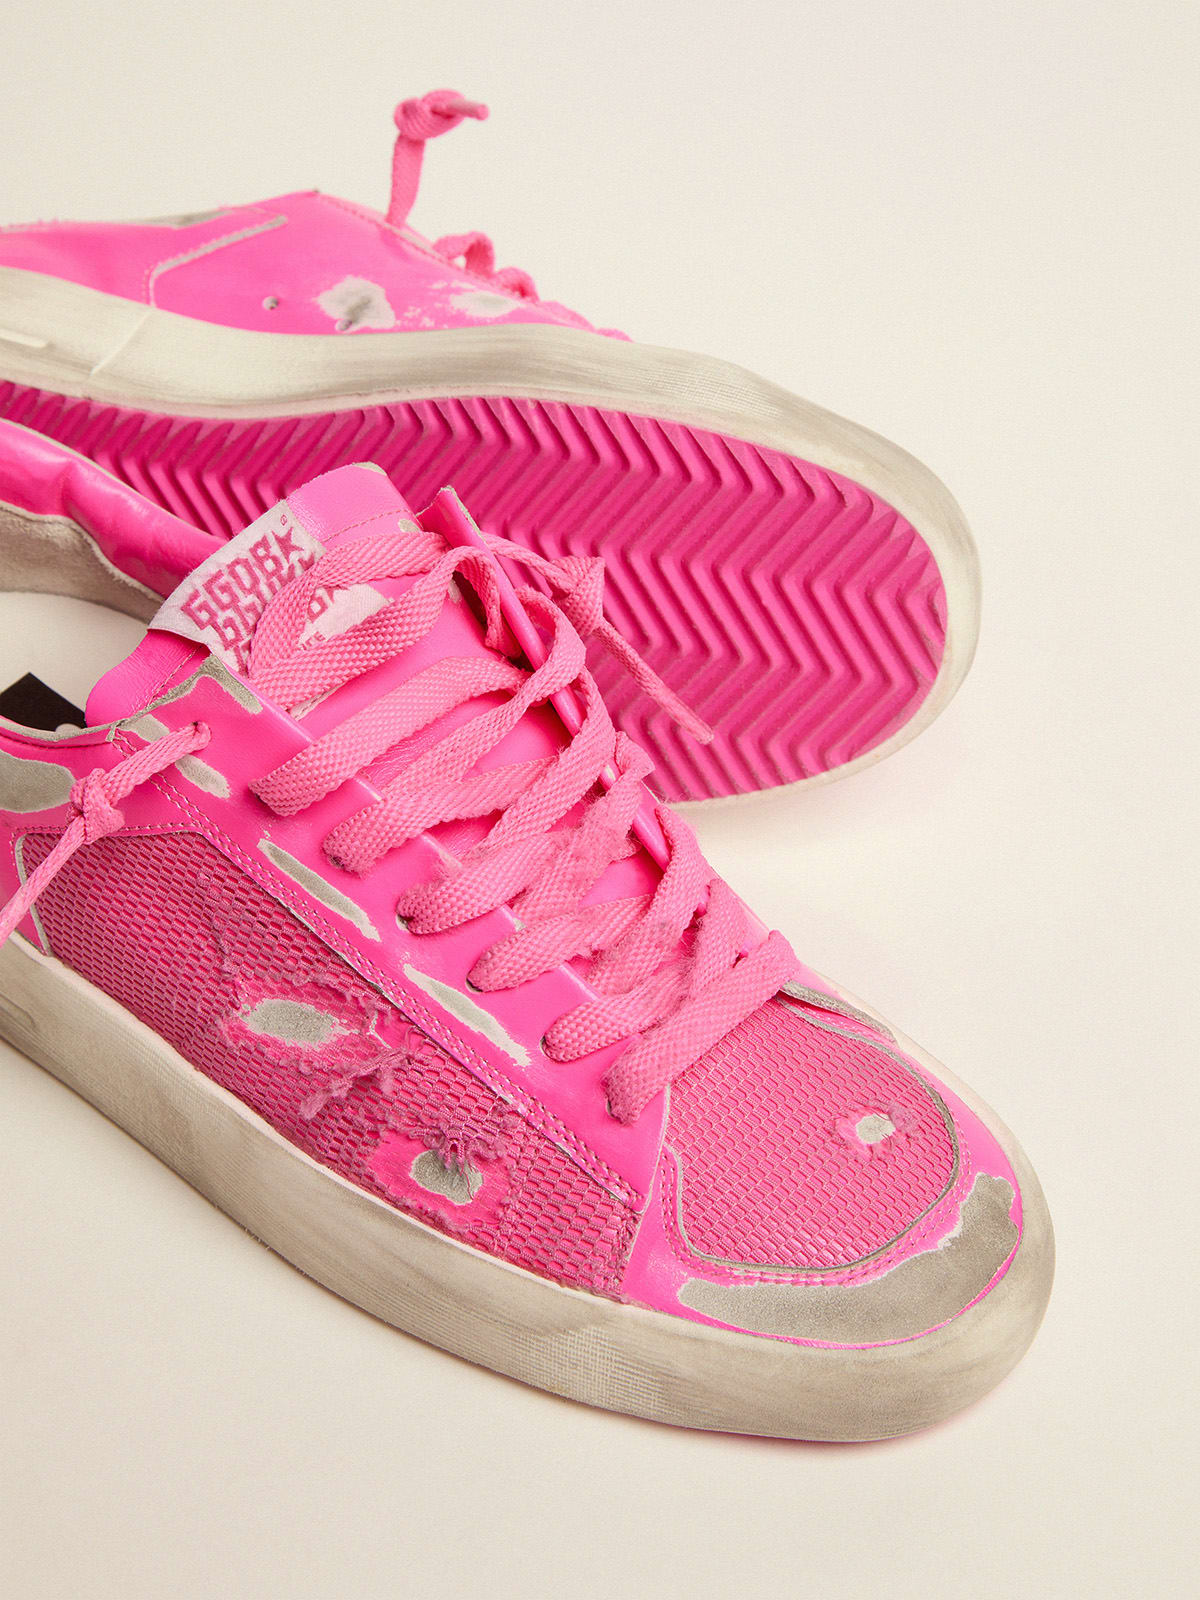 Golden Goose - Men’s Stardan sneakers in fluorescent pink leather and mesh in 